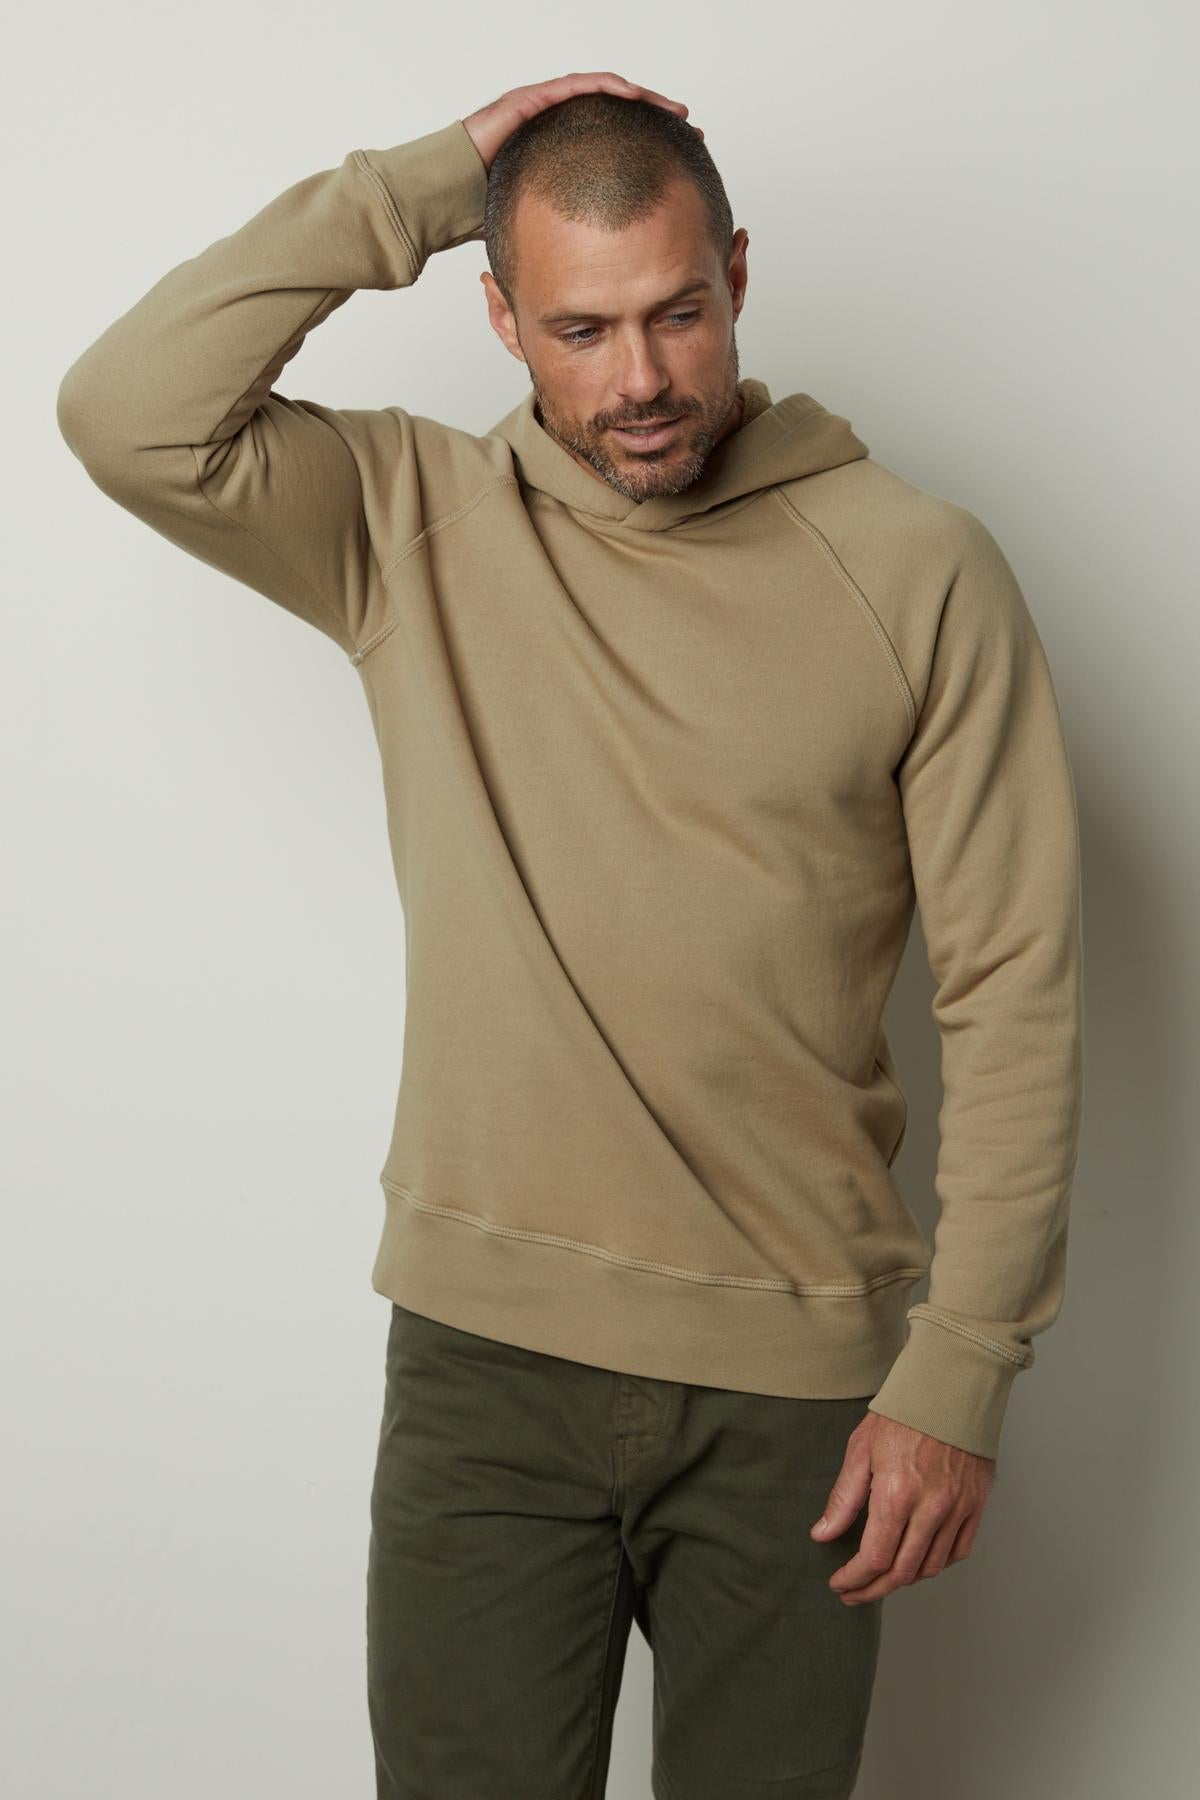 A man wearing a HOPKIN PULLOVER HOODIE by Velvet by Graham & Spencer and green pants crafted for comfort.-35547534033089